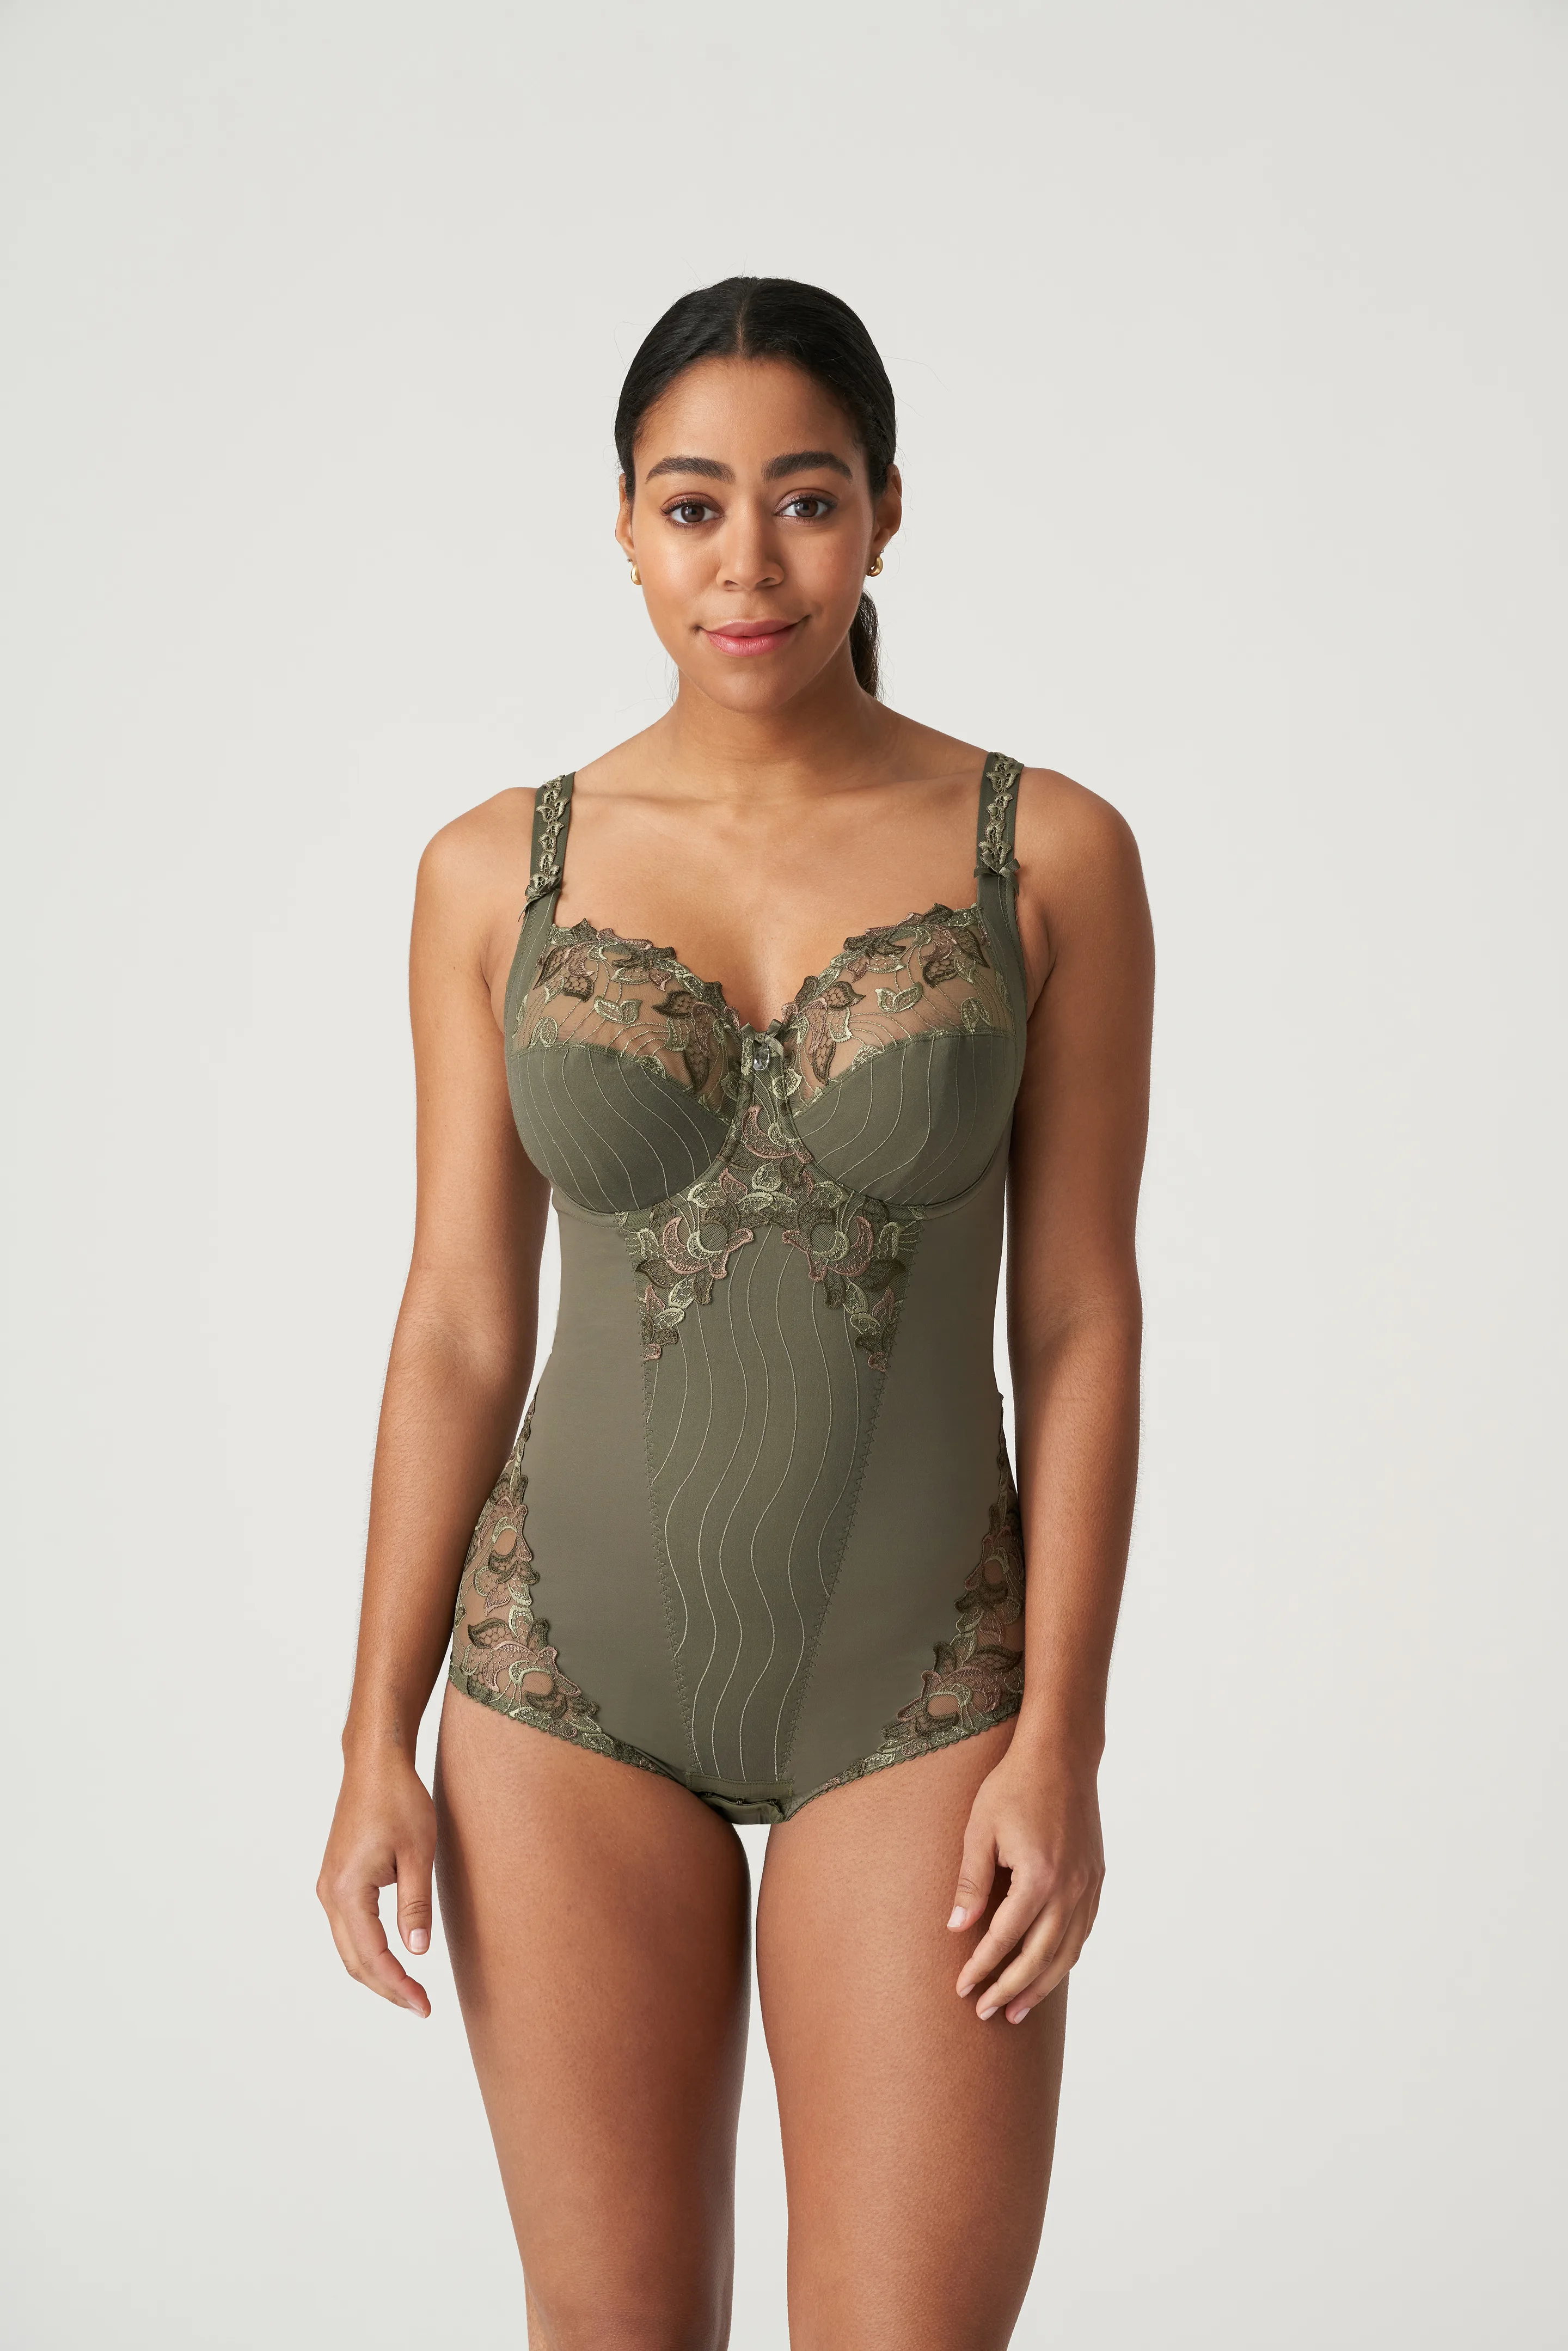 Primadonna Deauville Paradise Green Full Cup Comfort Bra, 40H